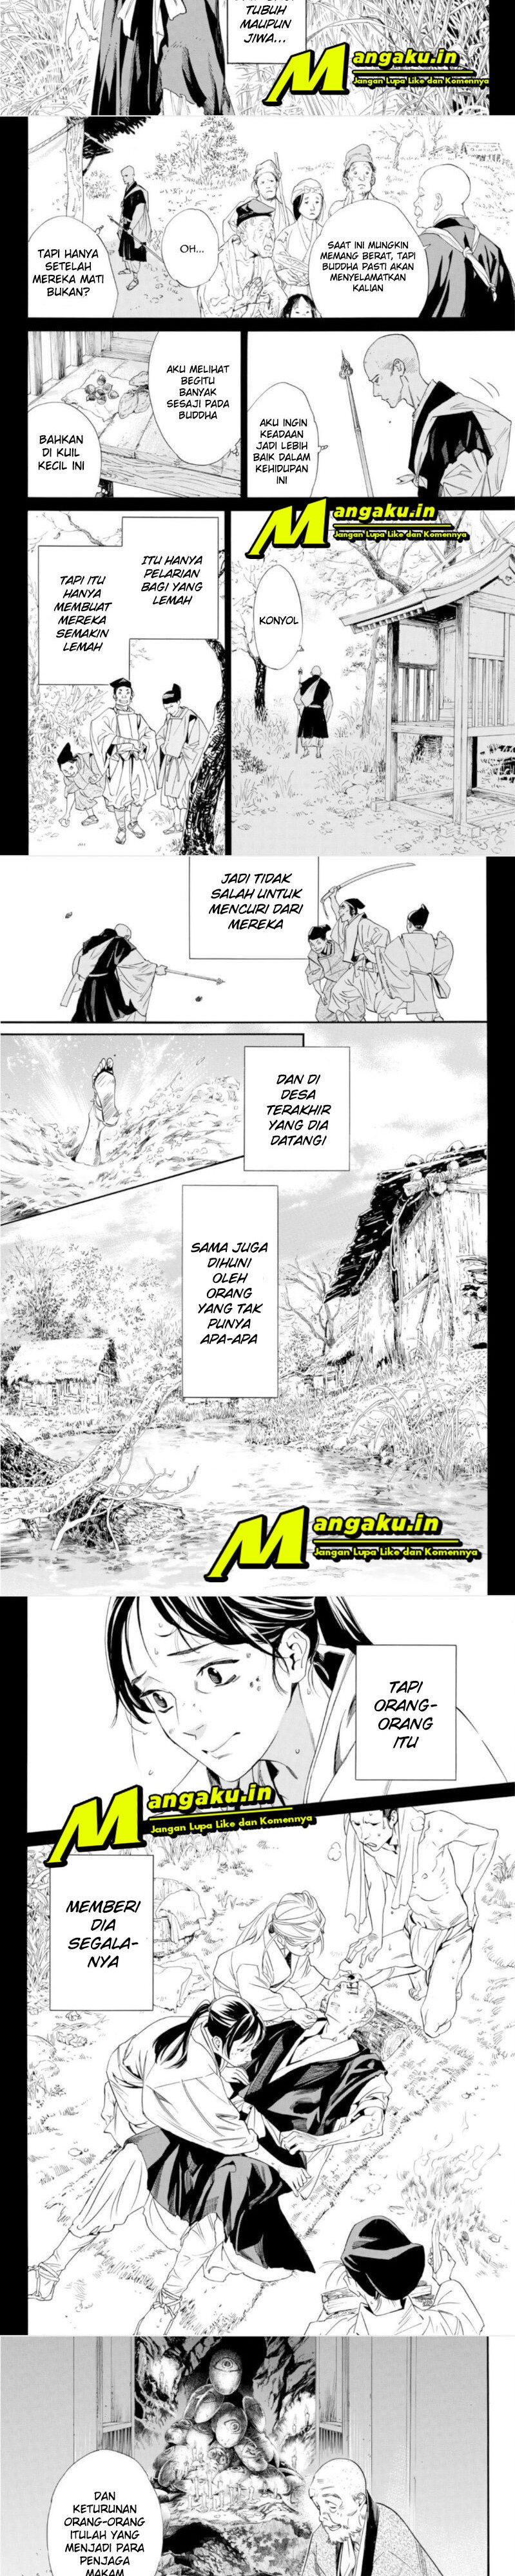 Noragami Chapter 101